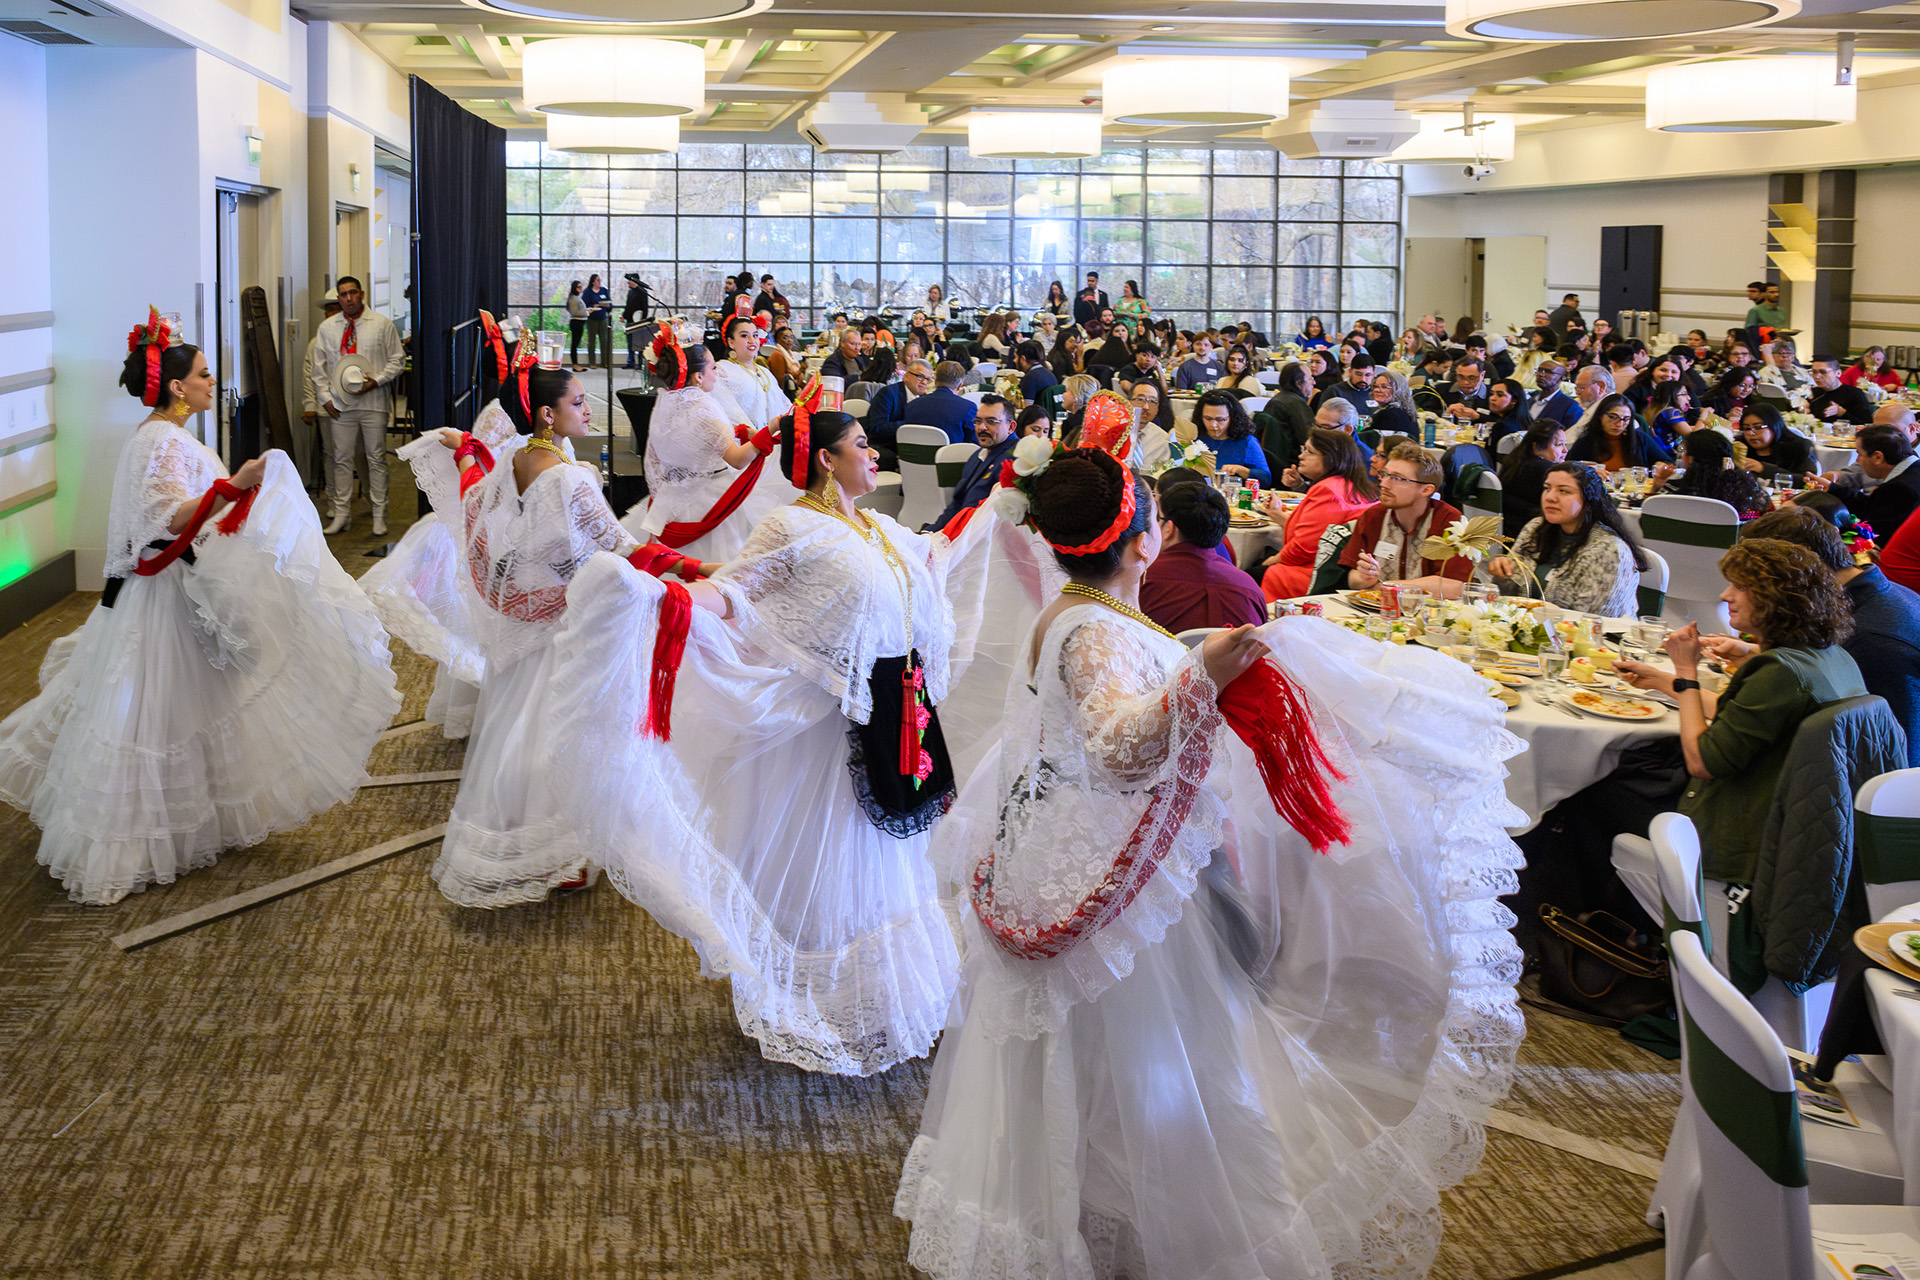 six dancers wearing flowing white dresses with red accents perform in front of the full room